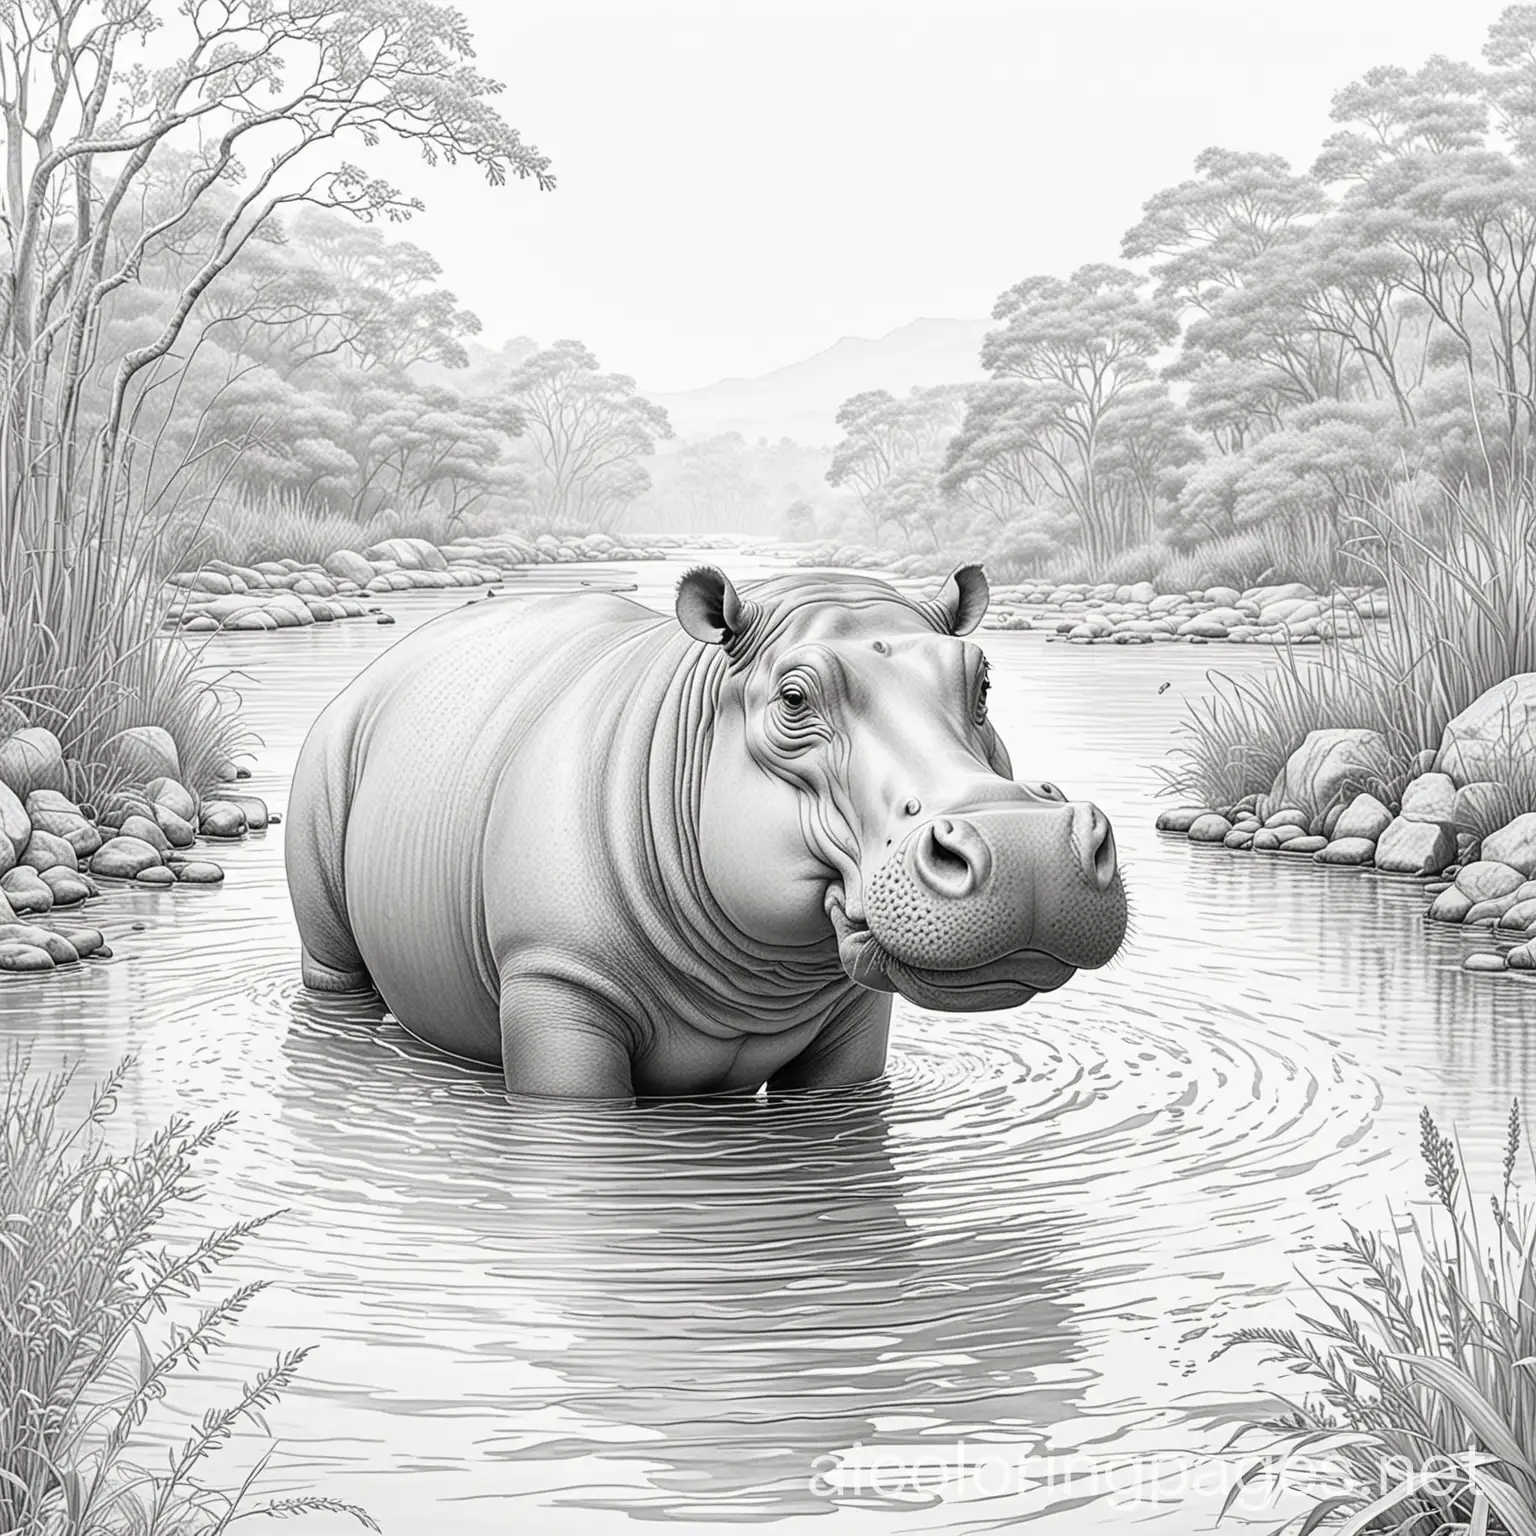 hippo swimming in river in savana for coloring page, Coloring Page, black and white, line art, white background, Simplicity, Ample White Space. The background of the coloring page is plain white to make it easy for young children to color within the lines. The outlines of all the subjects are easy to distinguish, making it simple for kids to color without too much difficulty